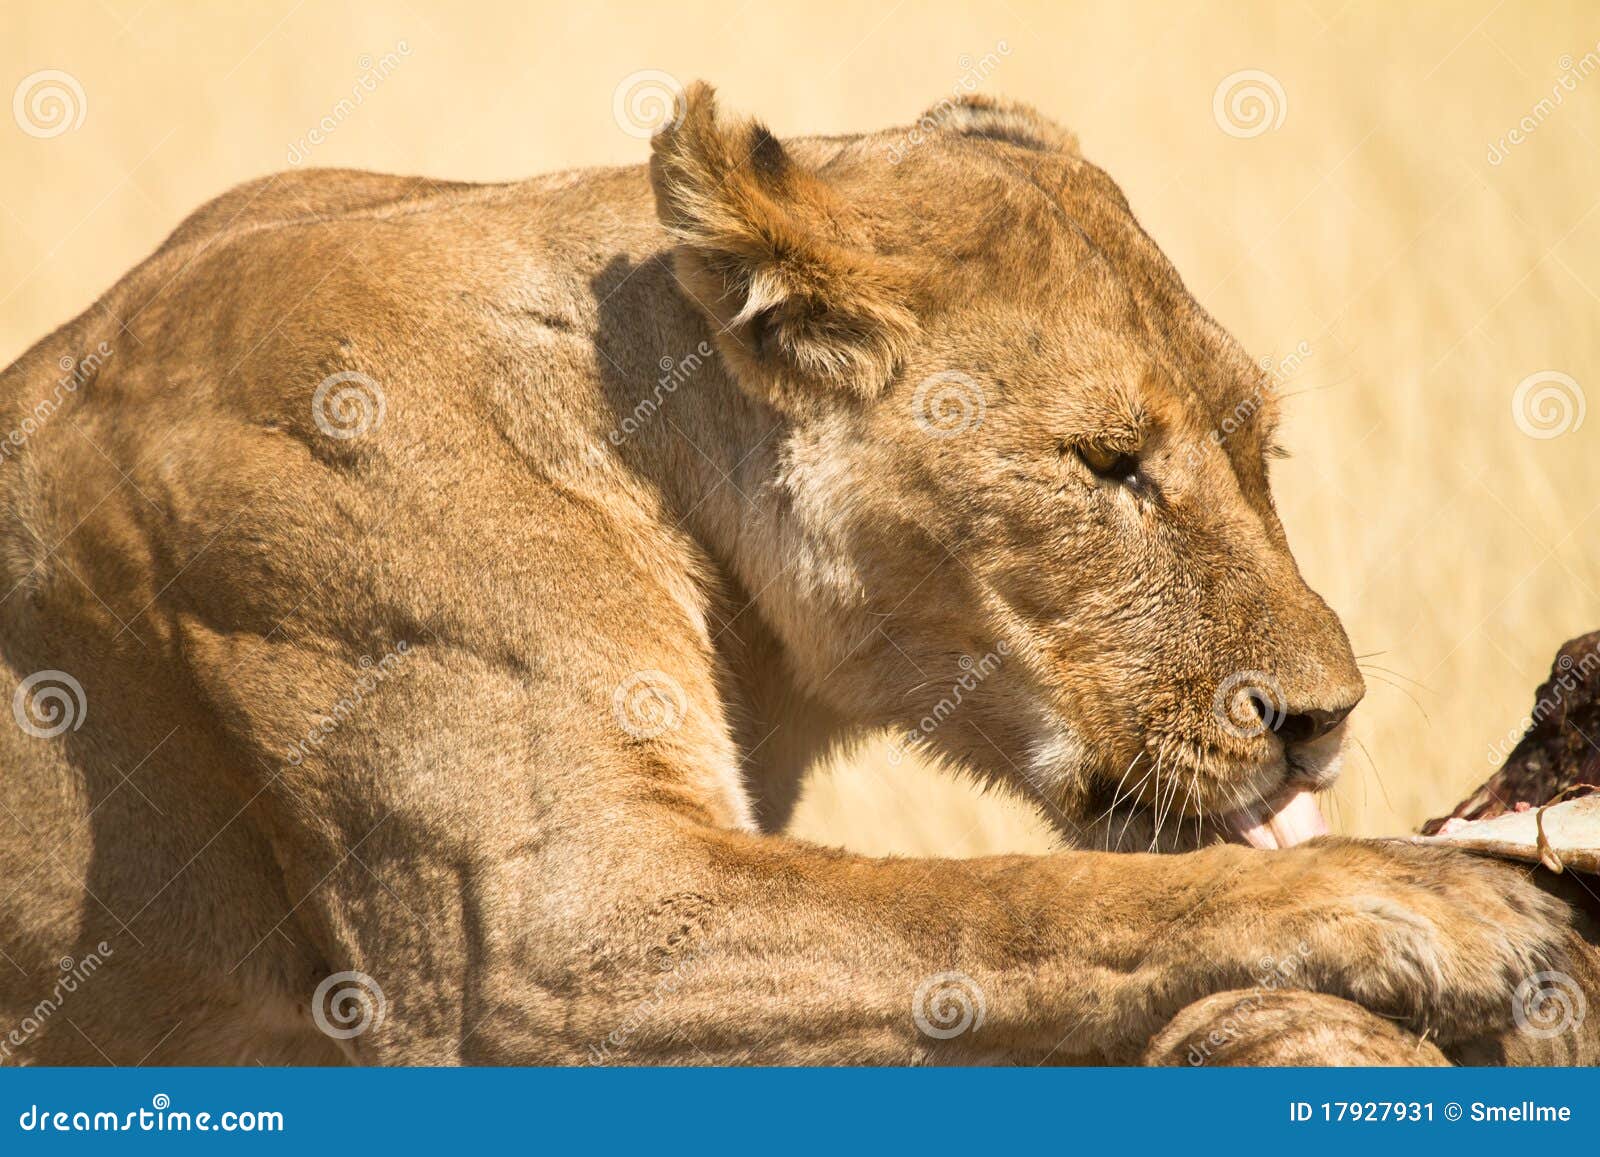 lioness with meat - Val Heart